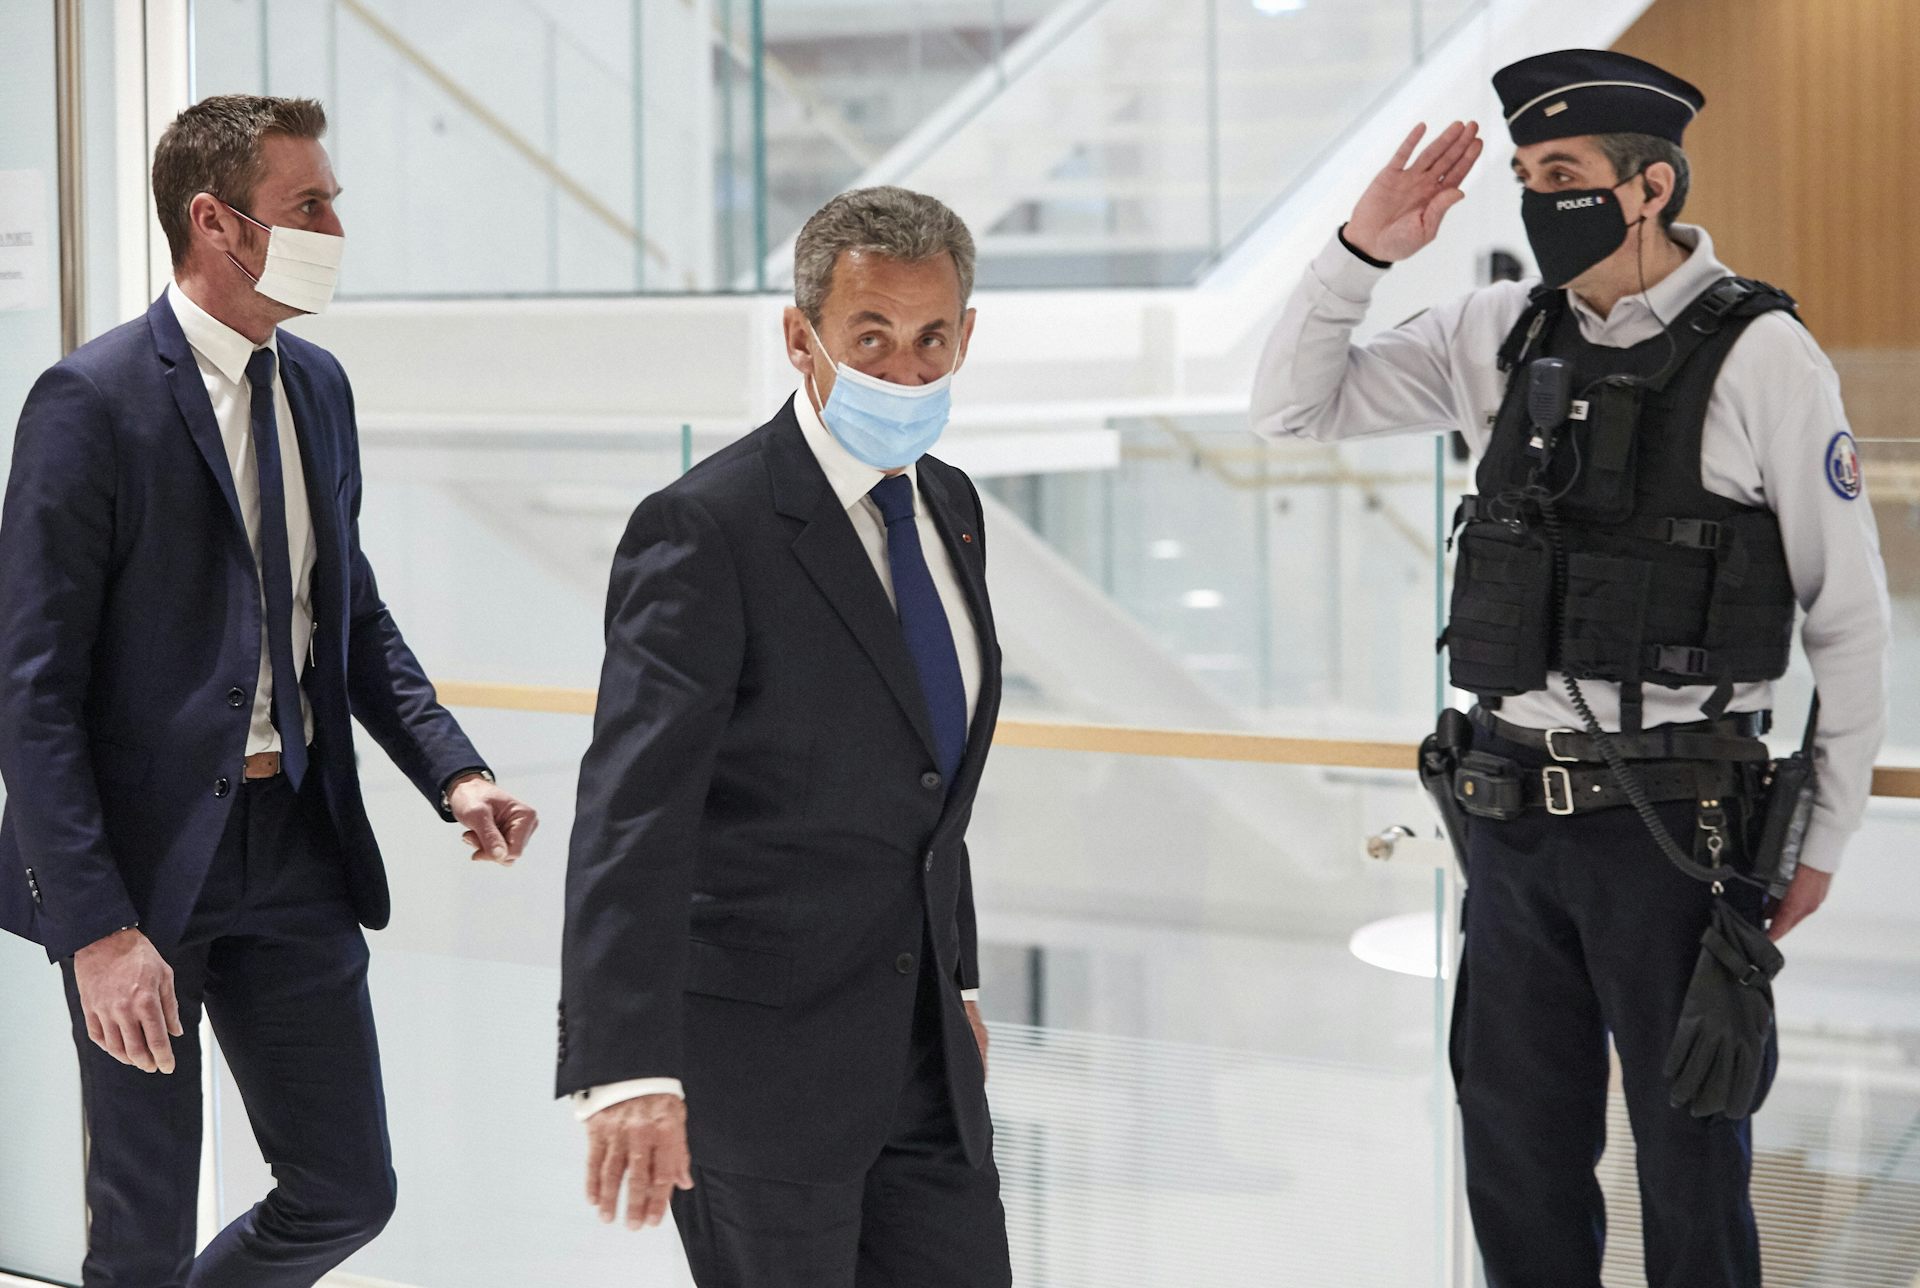 Sarkozy, wearing a face mask, walks through a glass building, trailed by another man in a suit. A police officer salutes.